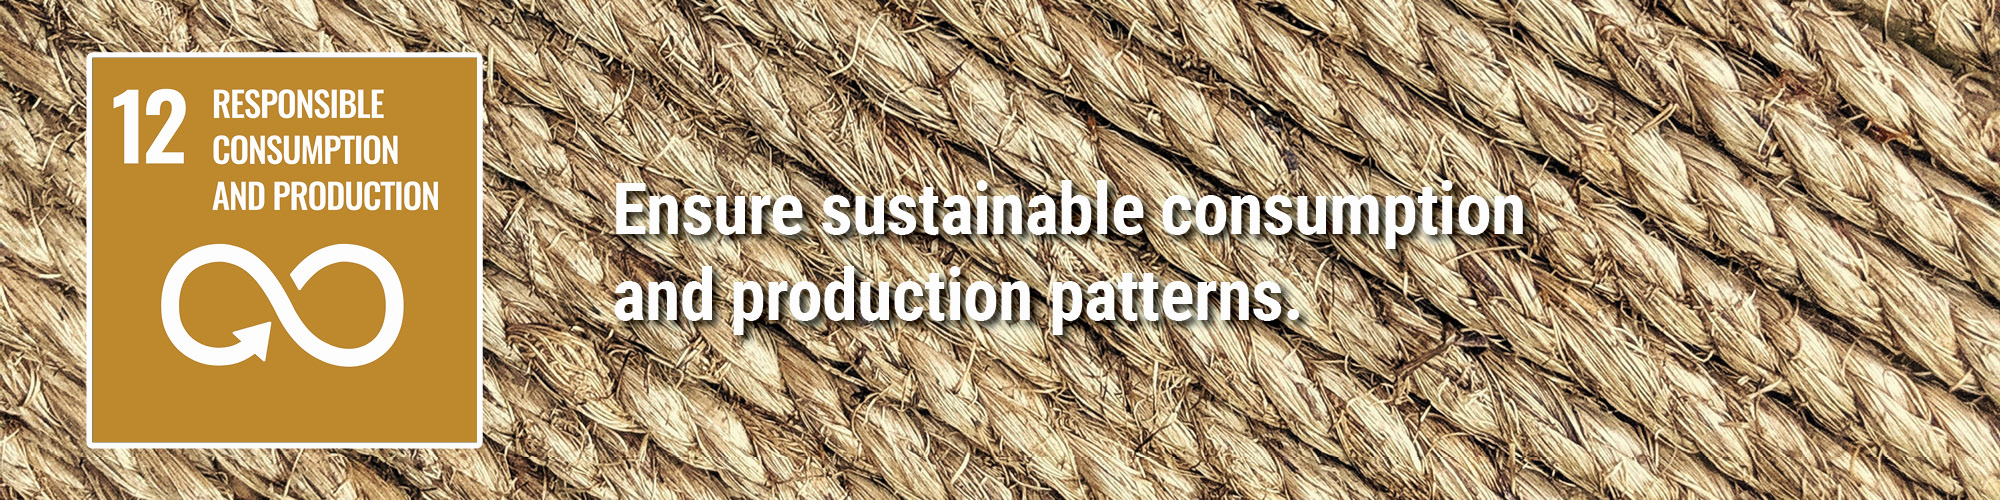 Ensure sustainable consumption and production patterns.